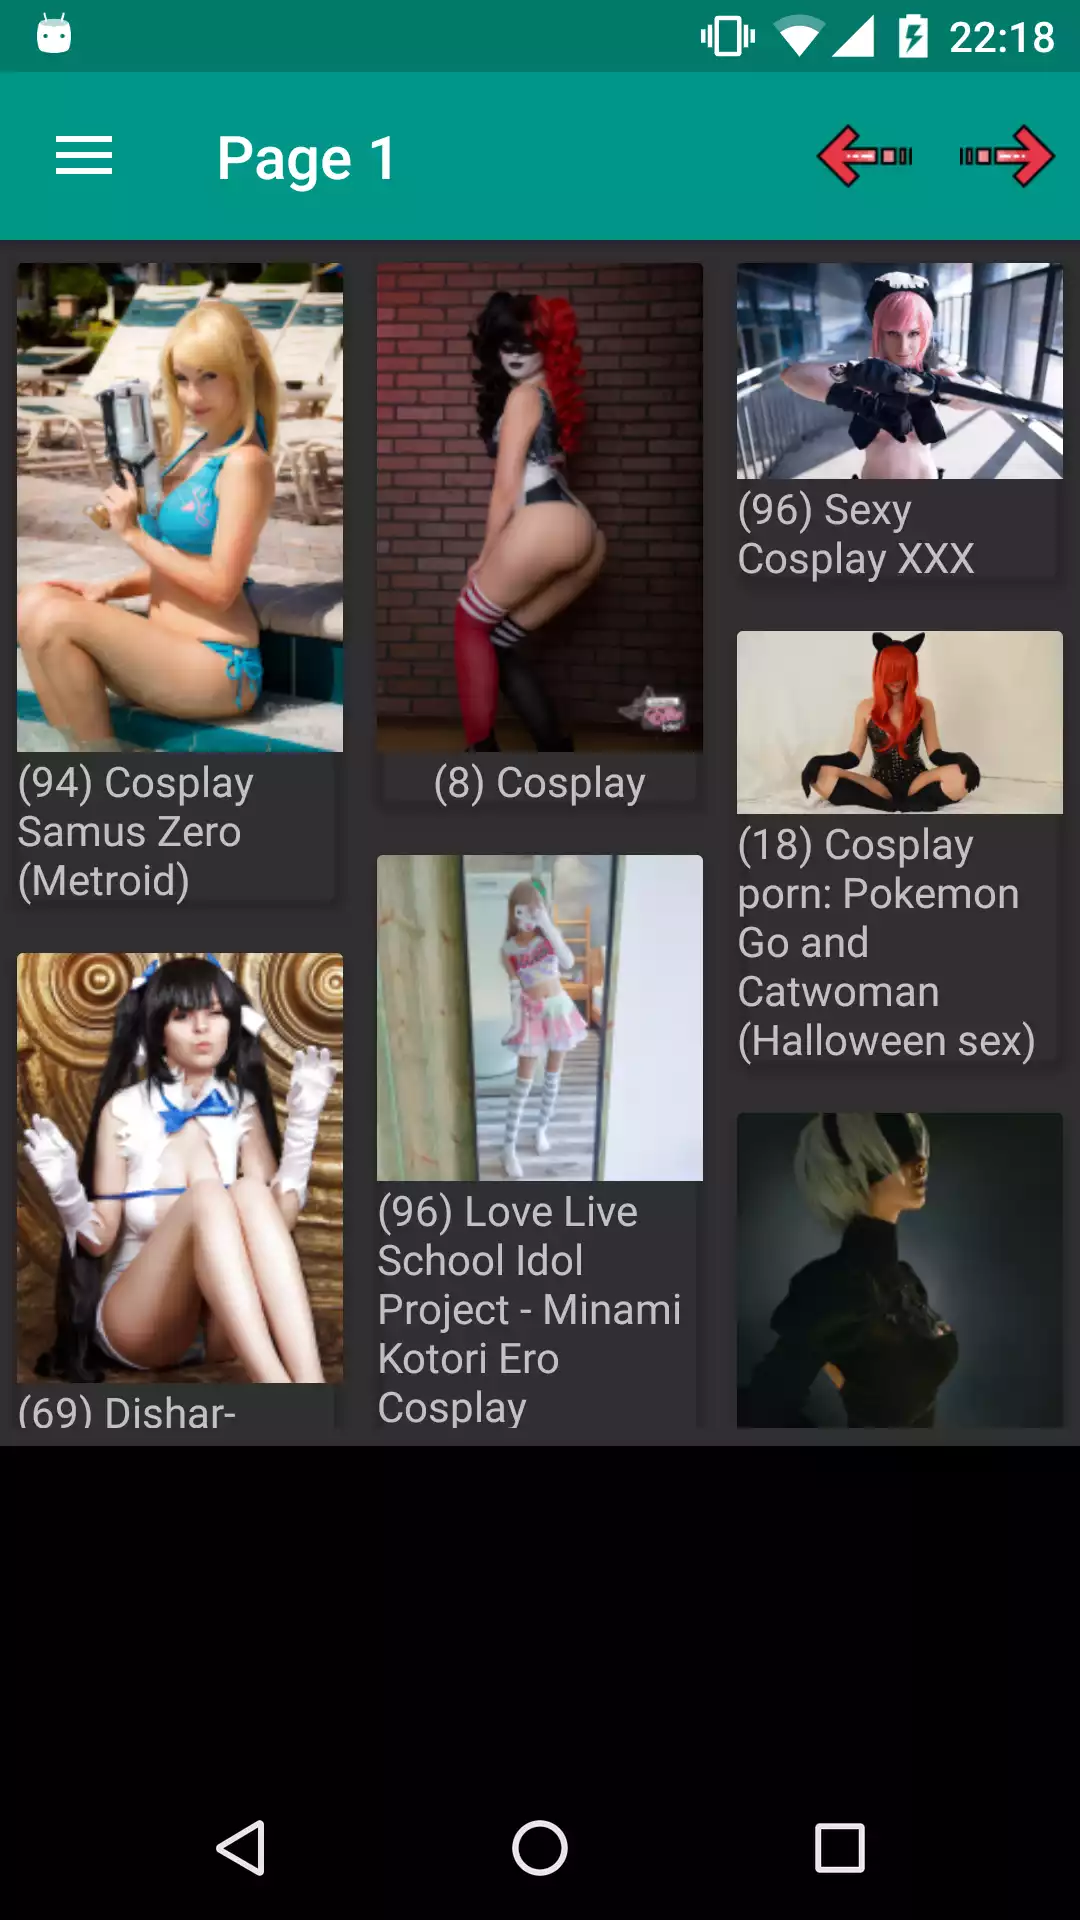 Cosplay Galleries 2 collection,adult,gallery,market,cosplay,futanari,manga,daily,anime,pcs,picture,hot,hentai,caprice,beta,amateurs,apk,android,apps,sexy,galleries,pornstars,packs